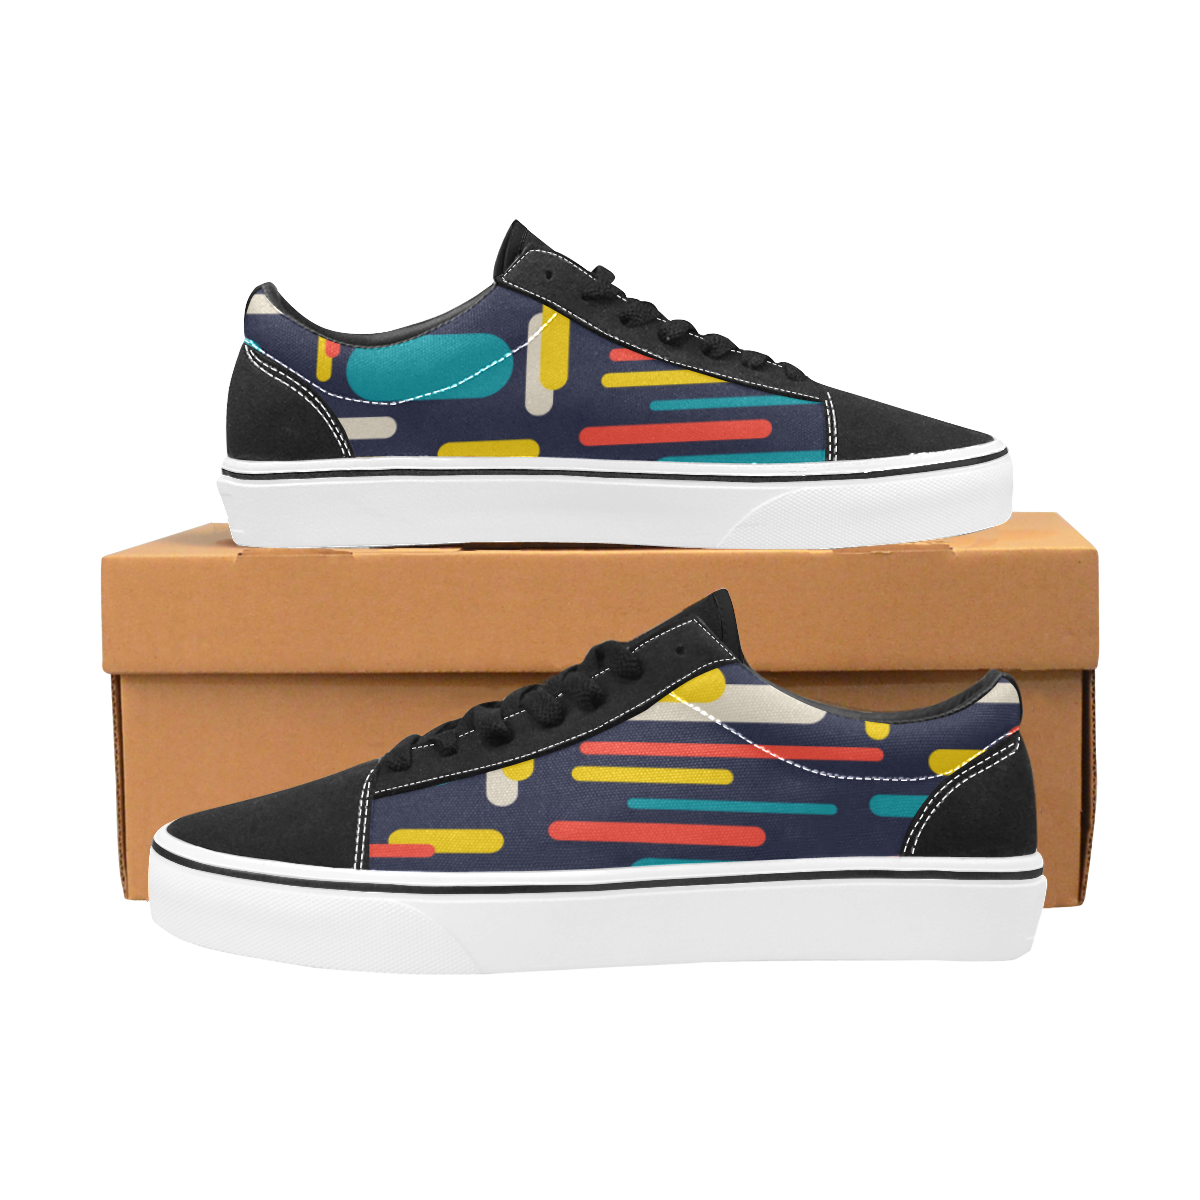 Colorful Rectangles Women's Low Top Skateboarding Shoes/Large (Model E001-2)